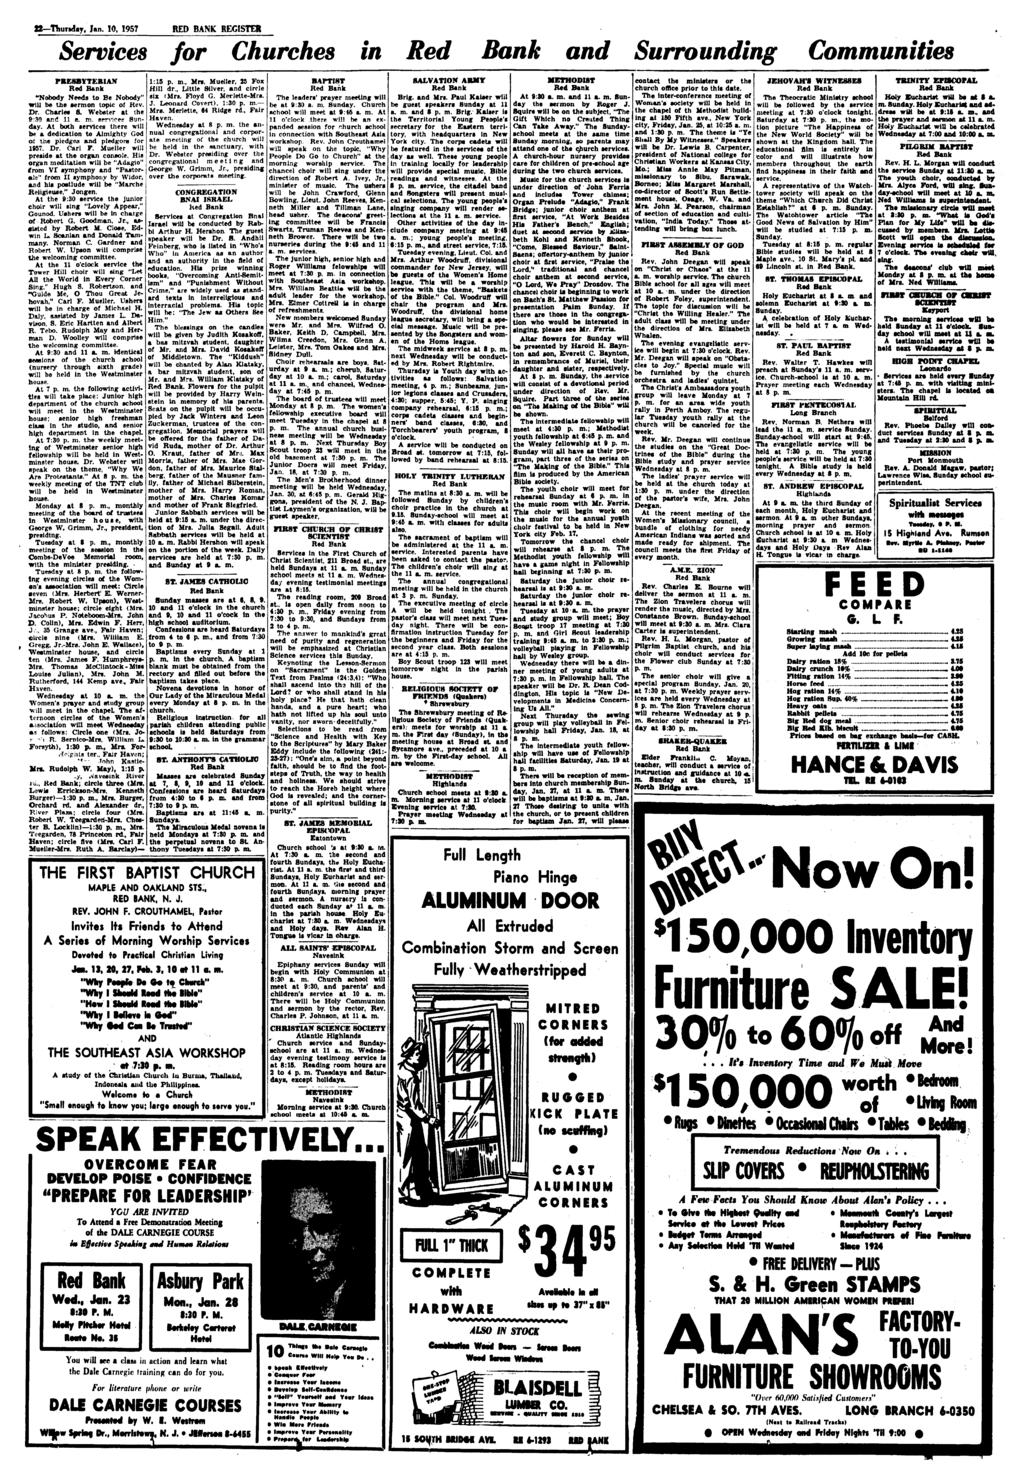 tt Thursday, Jan. 10, 1957 RED BANK REGISTER Services for Churches in Red Bank and Surrounding Communities PRESBYTERIAN Red Bank "Nobody Needs to Be Nobody" will be the sermon topic of Rev. six (Mr».